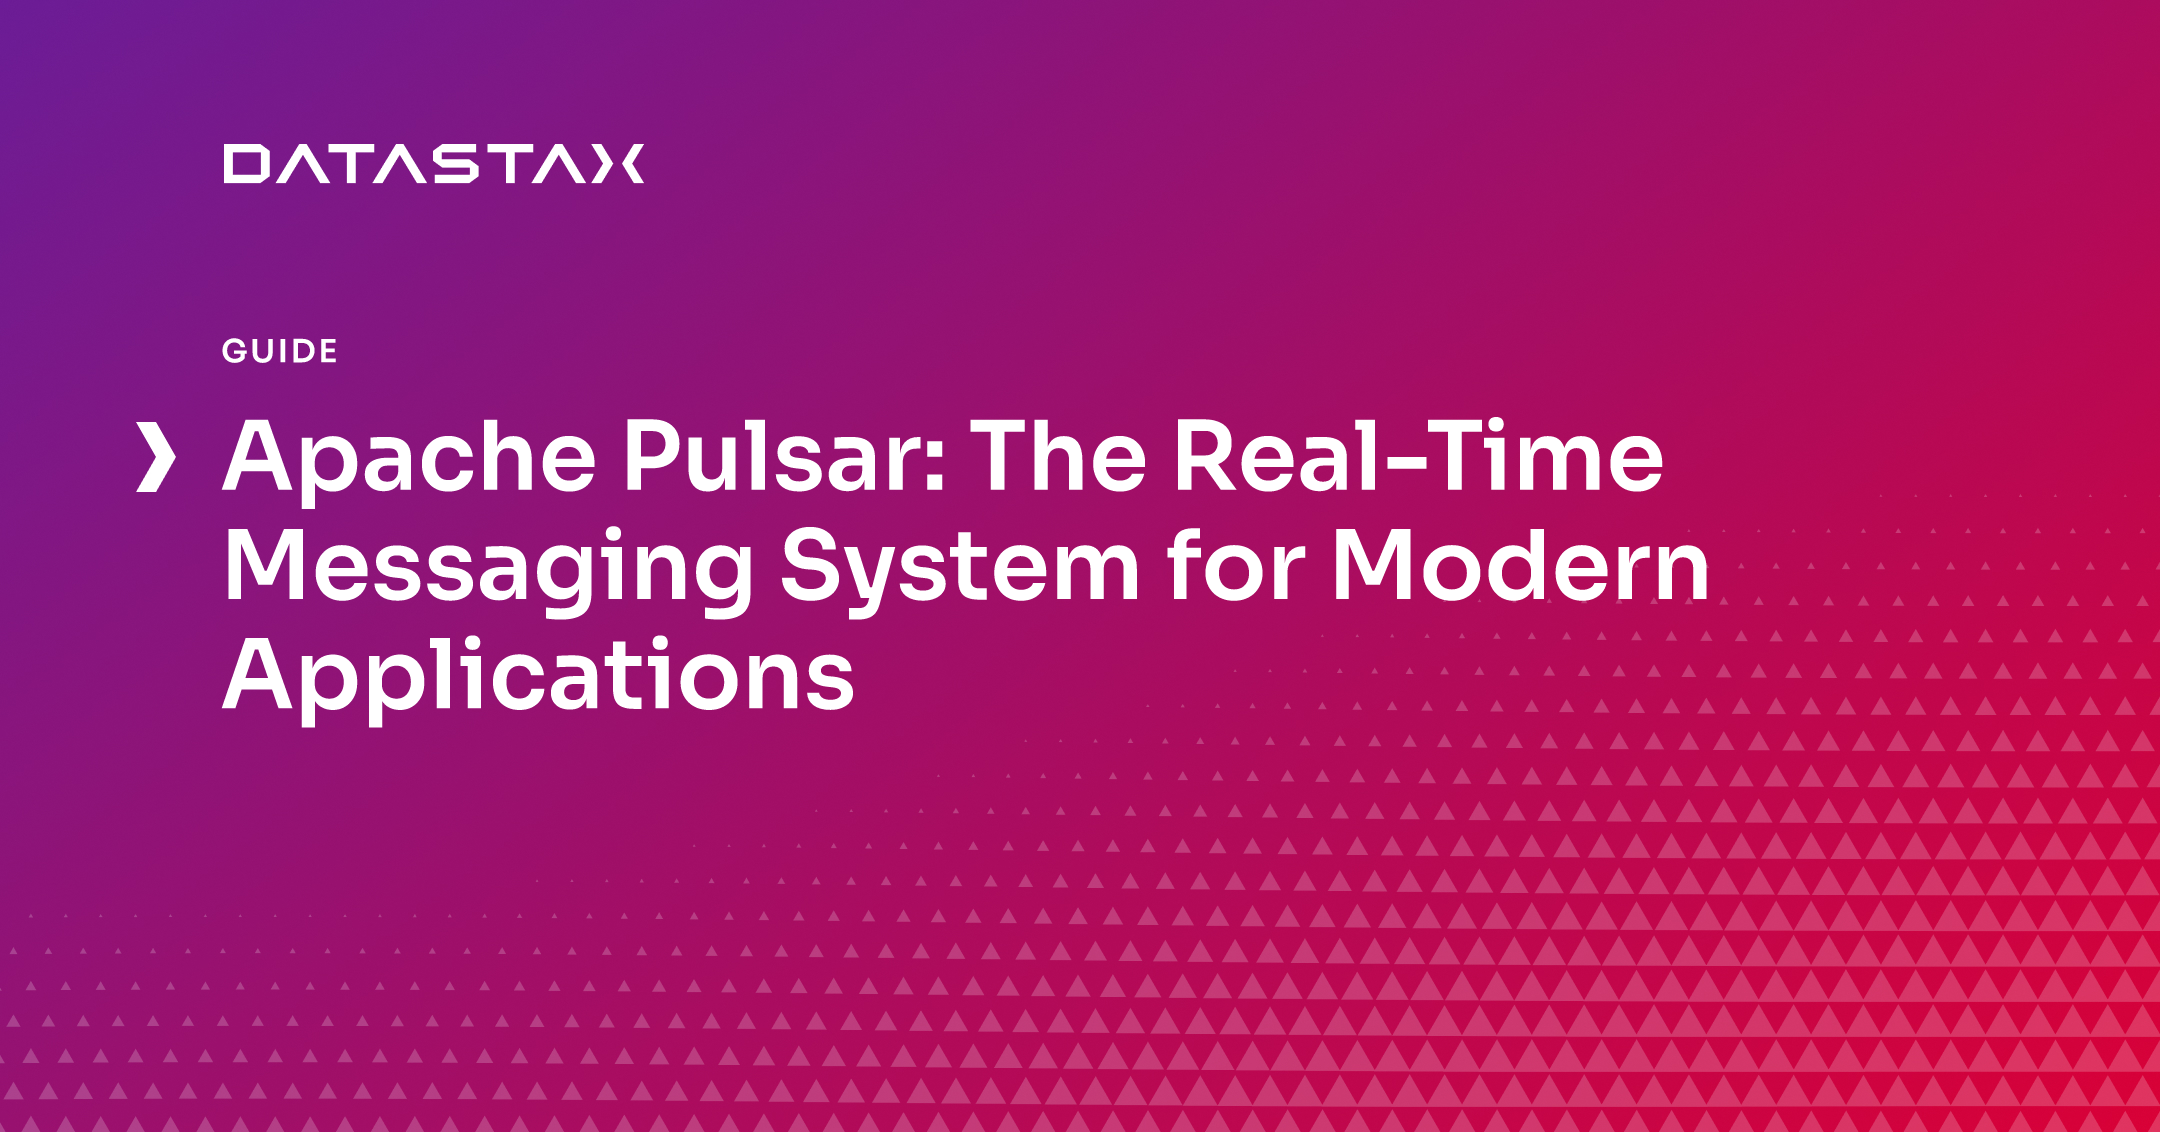 Apache Pulsar: The Real-Time Messaging System for Modern Applications